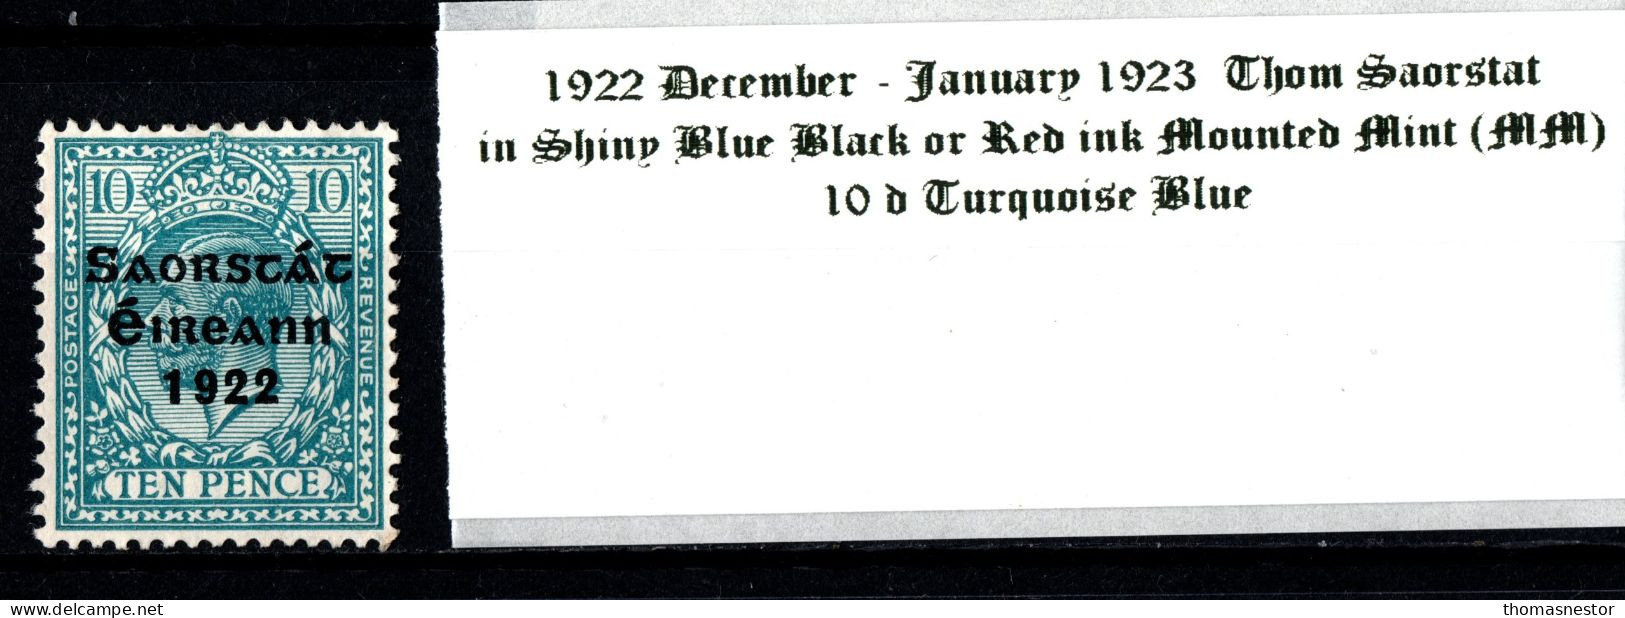 1922 - 1923 December-January Thom Saorstát In Shiny Blue Black Or Red Ink, 10 D Turquoise Blue, Mounted Mint (MM) - Ongebruikt